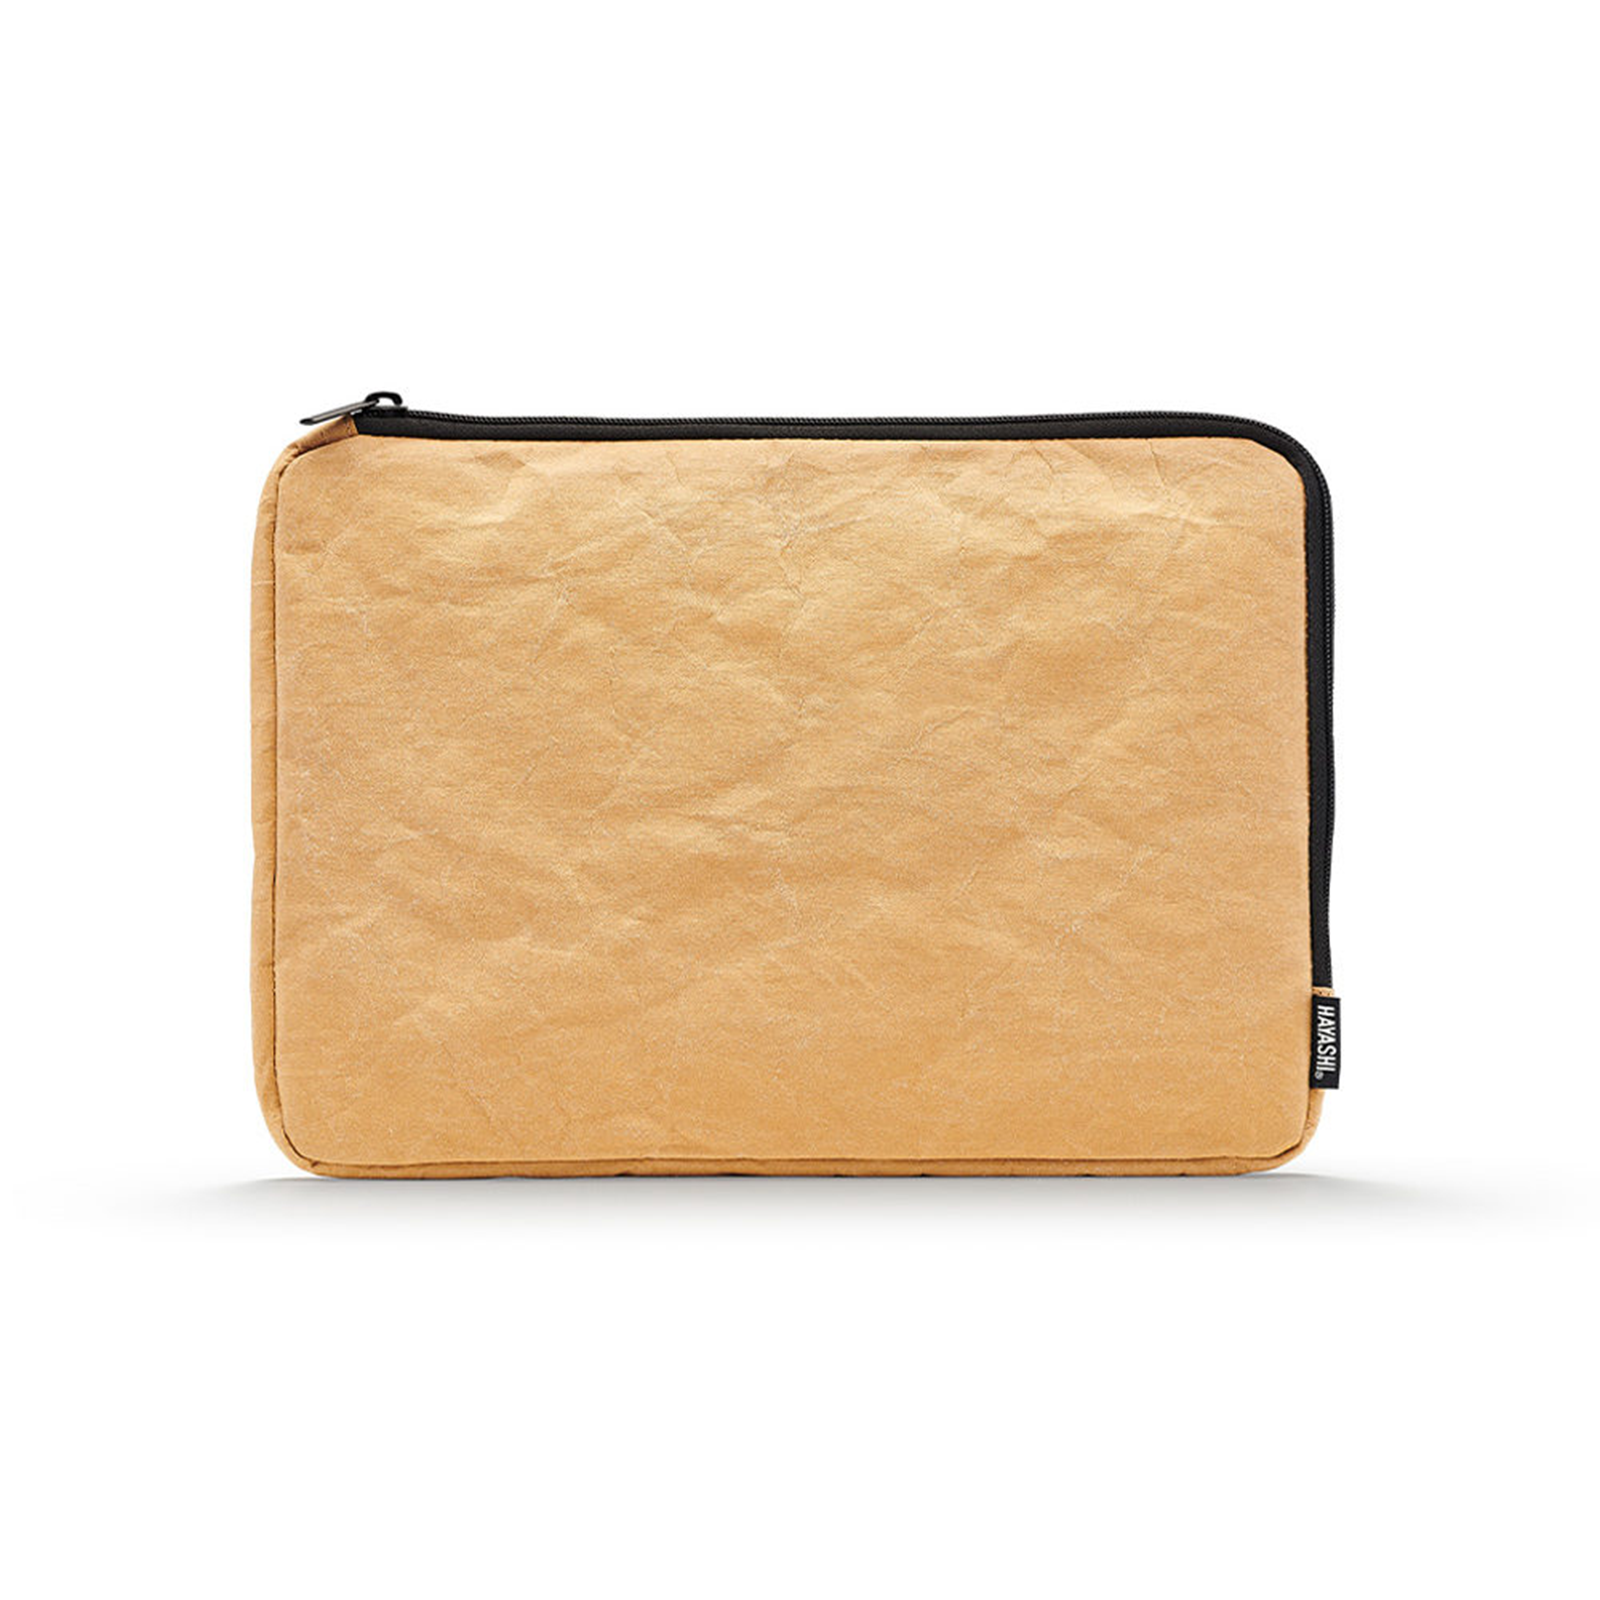 Vegan Paper Leather Laptop Sleeves in Dust Colour